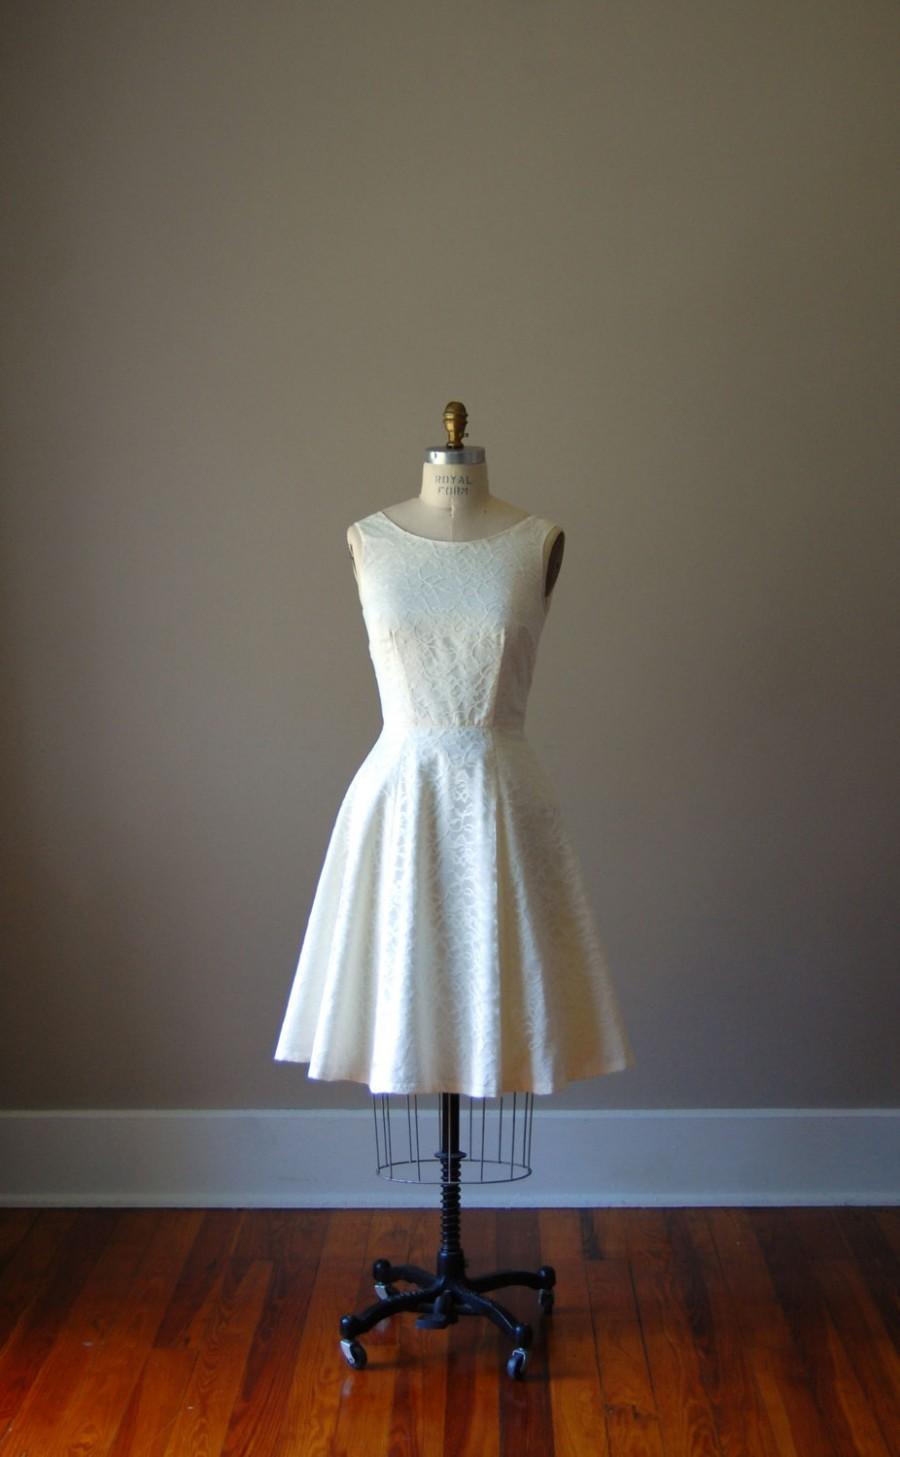 Wedding - Ivory Cotton and Lace Cocktail Dress with Scoop Neck and Full Skirt / Bridesmaid/ Wedding / Knee Length / Circle Skirt / Scoop Back / Cream